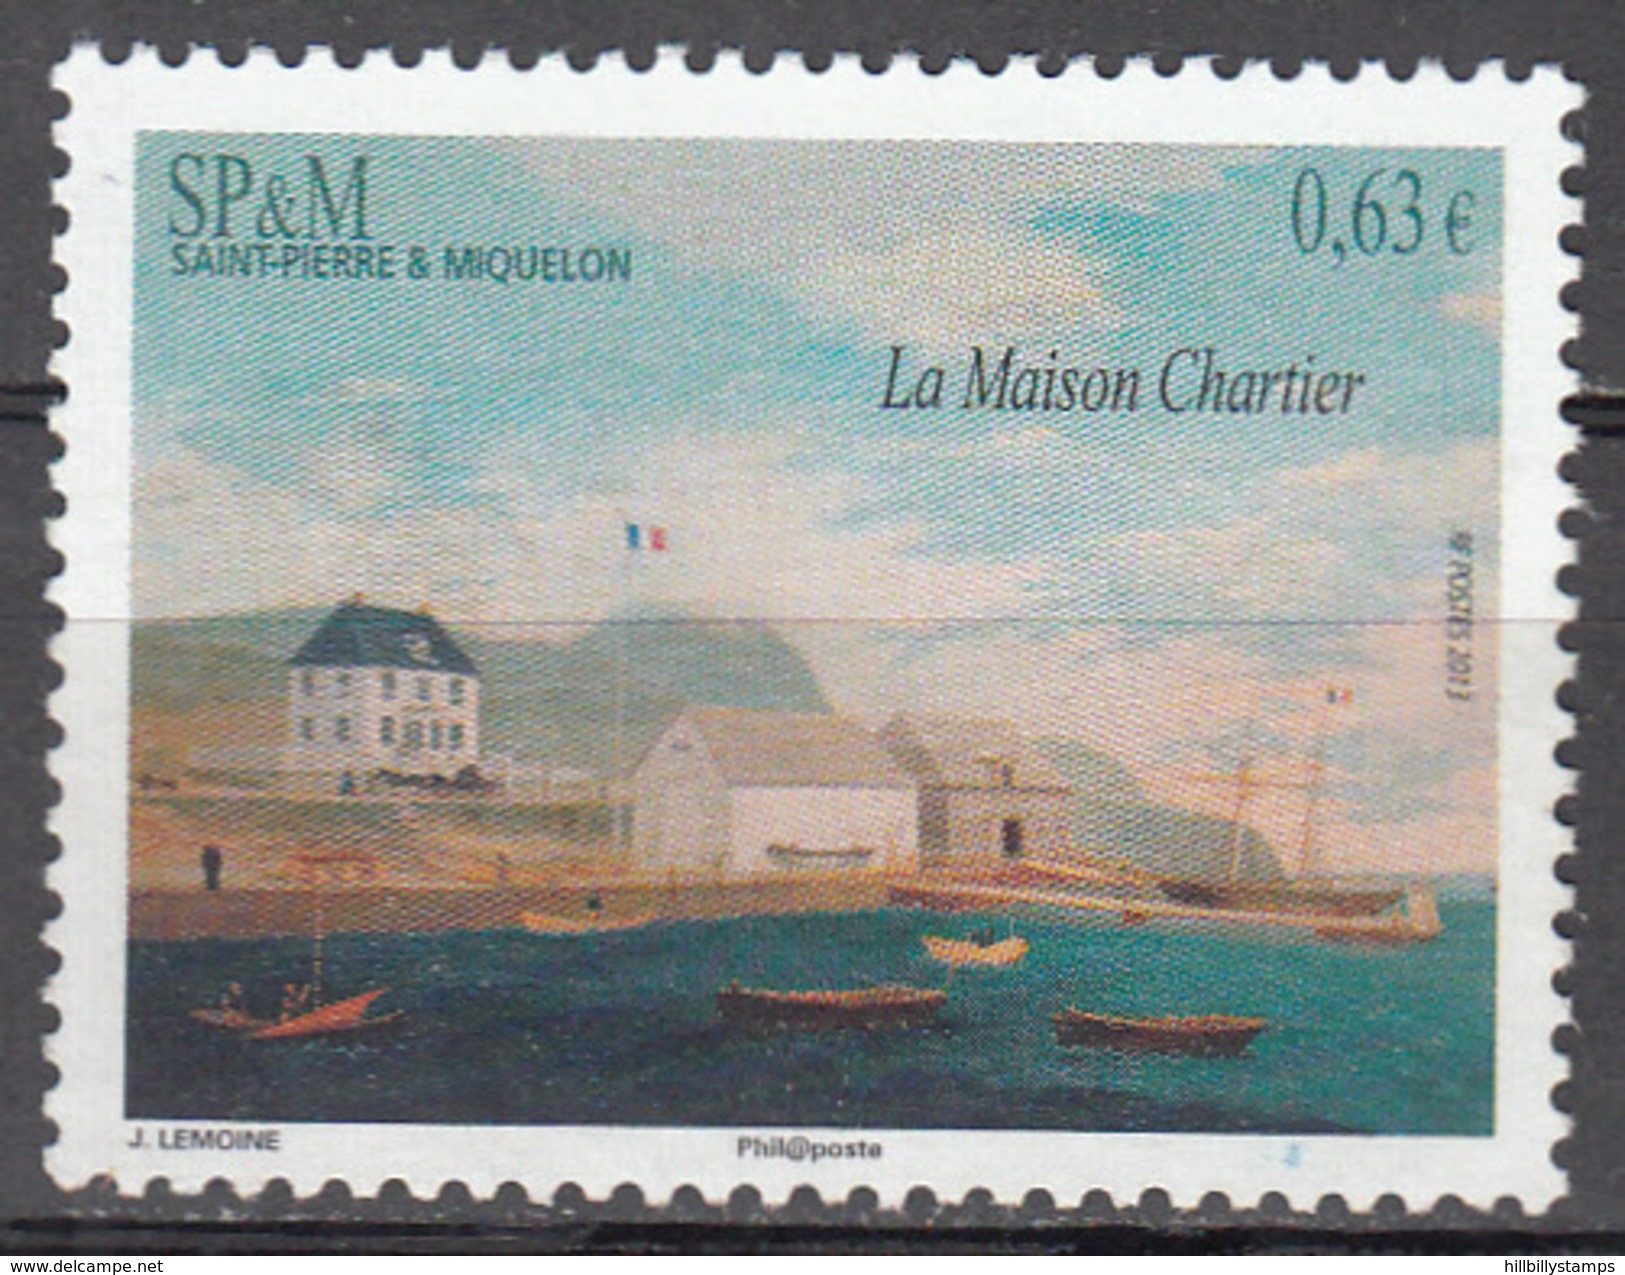 ST. PIERRE AND MIQUELON       SCOTT NO.  967     USED       YEAR  2013 - Used Stamps